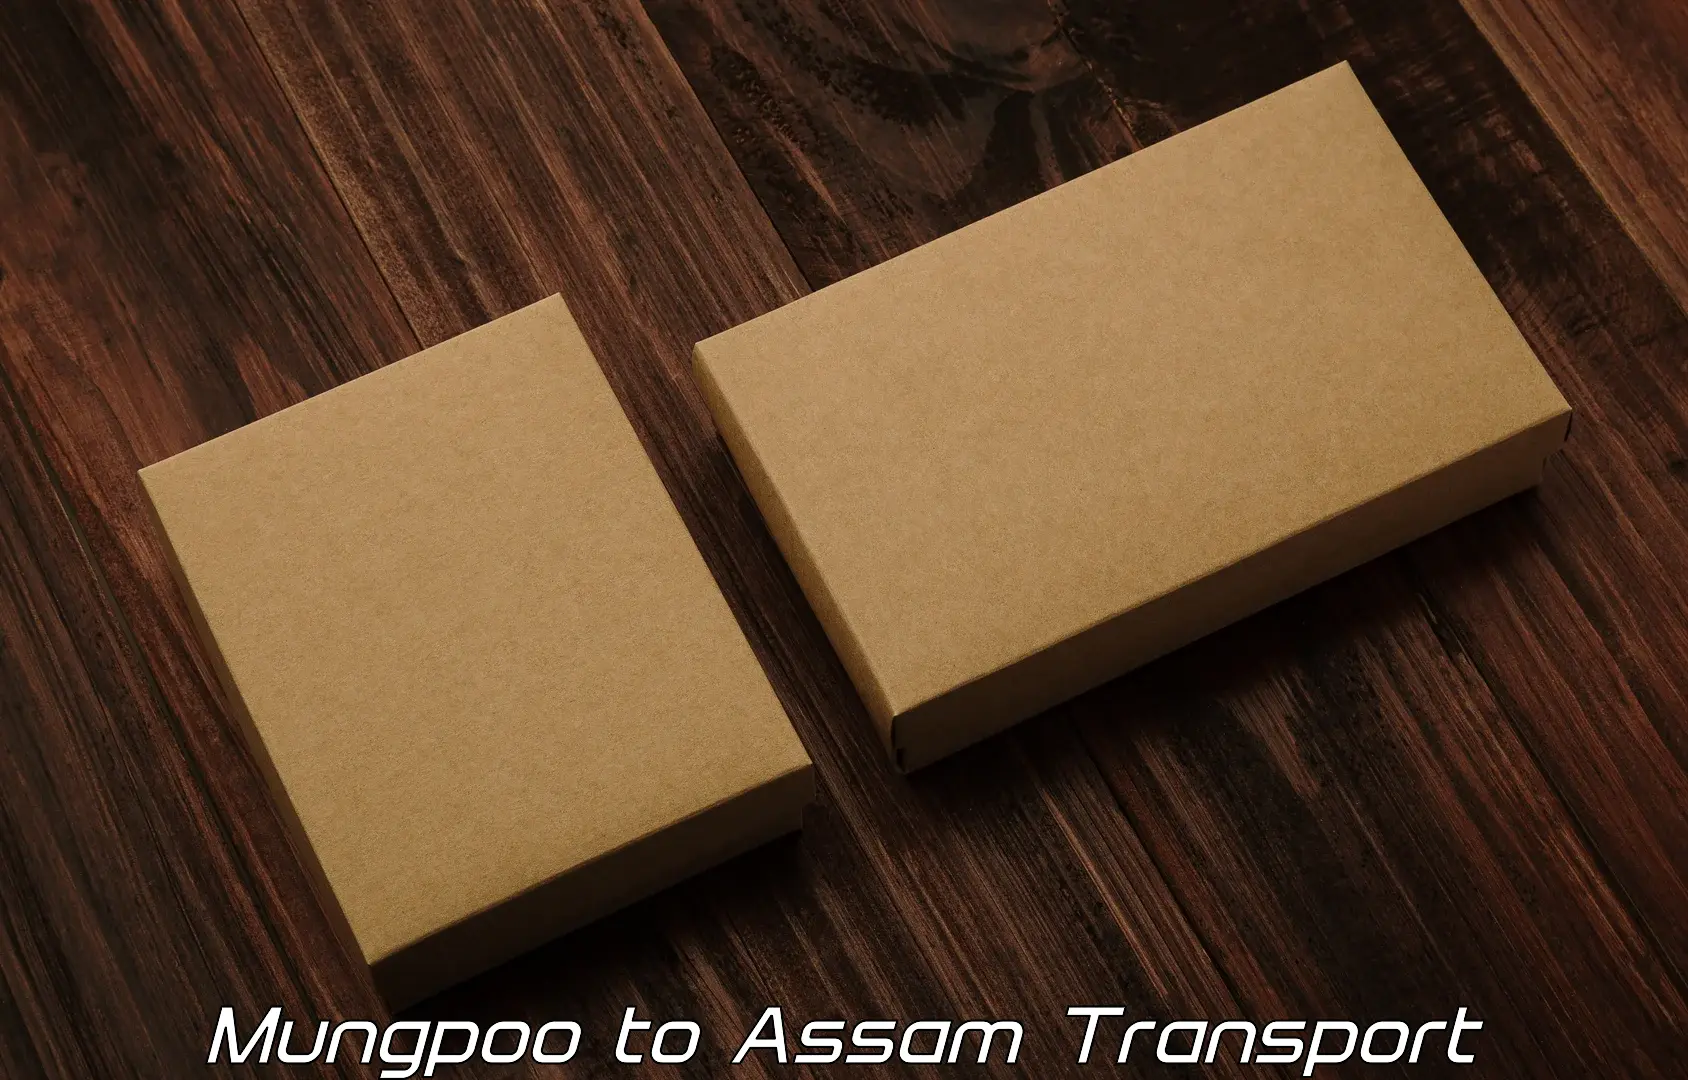 Express transport services in Mungpoo to Nagaon